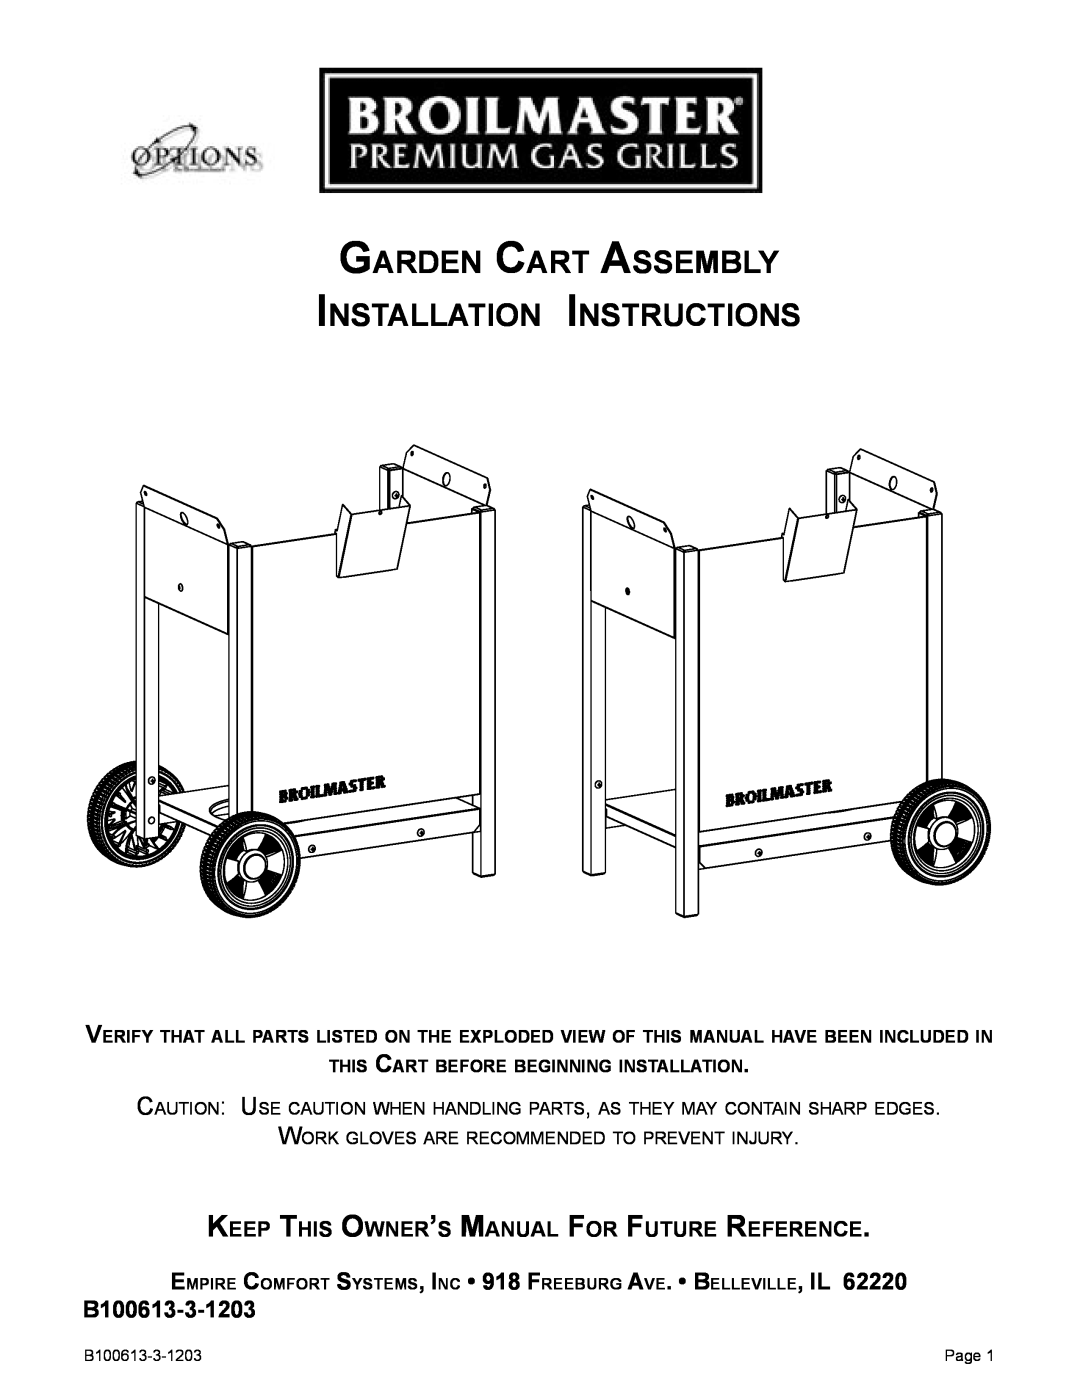 Broilmaster B100613-3-1203 owner manual Garden Cart Assembly Installation Instructions, Page 